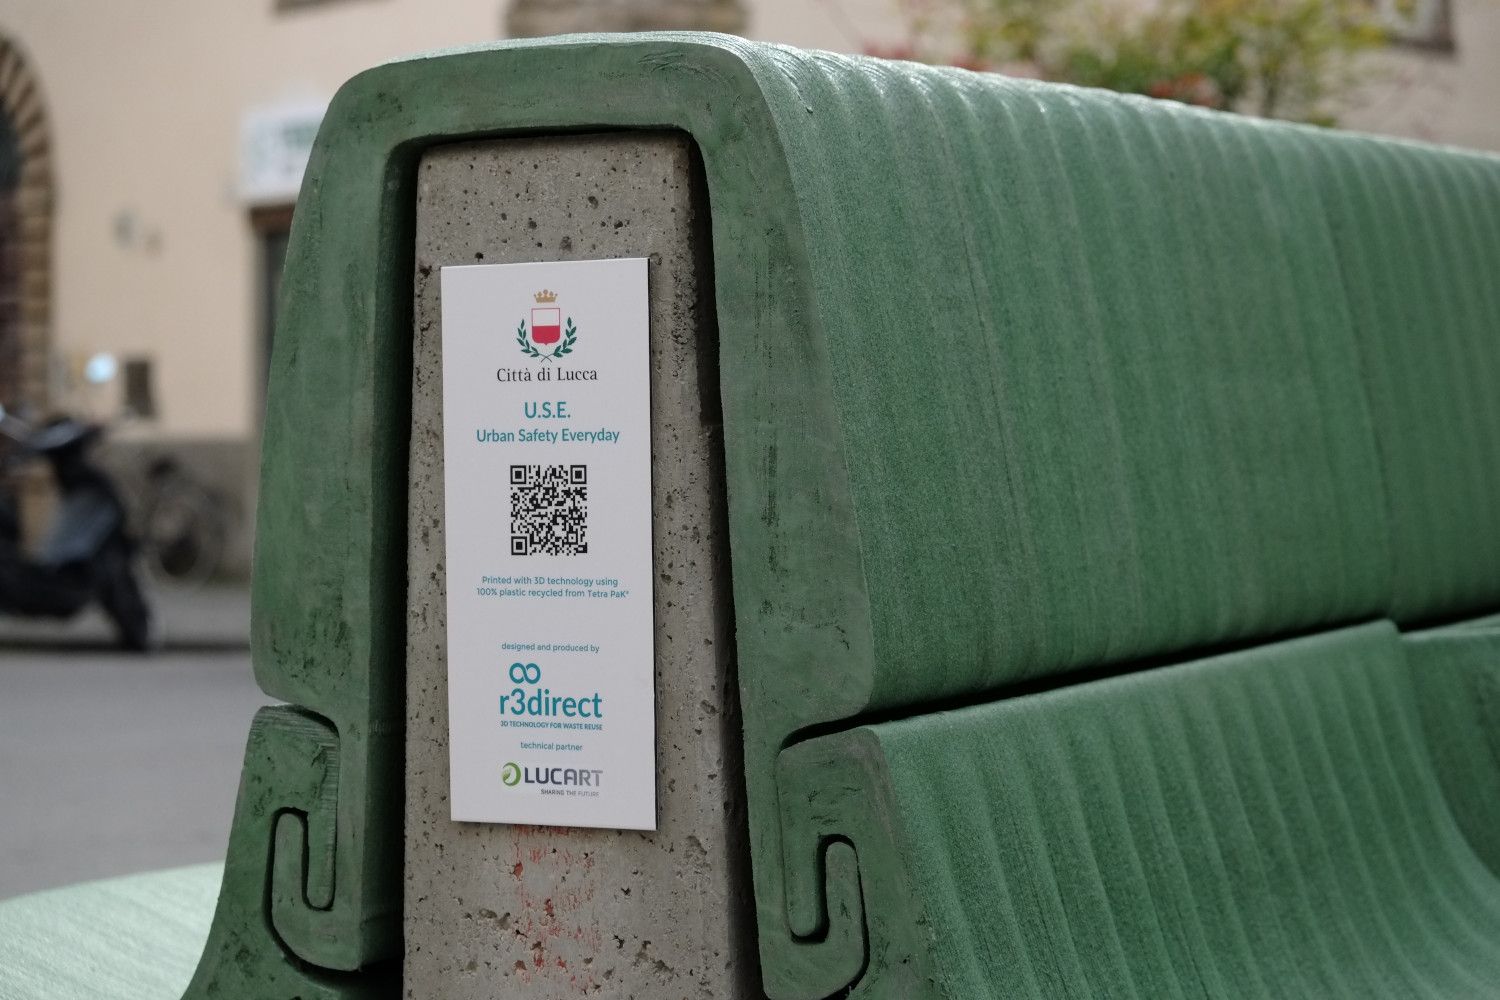 Public furniture printed in 3D with recycled plastic installed in the Italian city of Lucca.